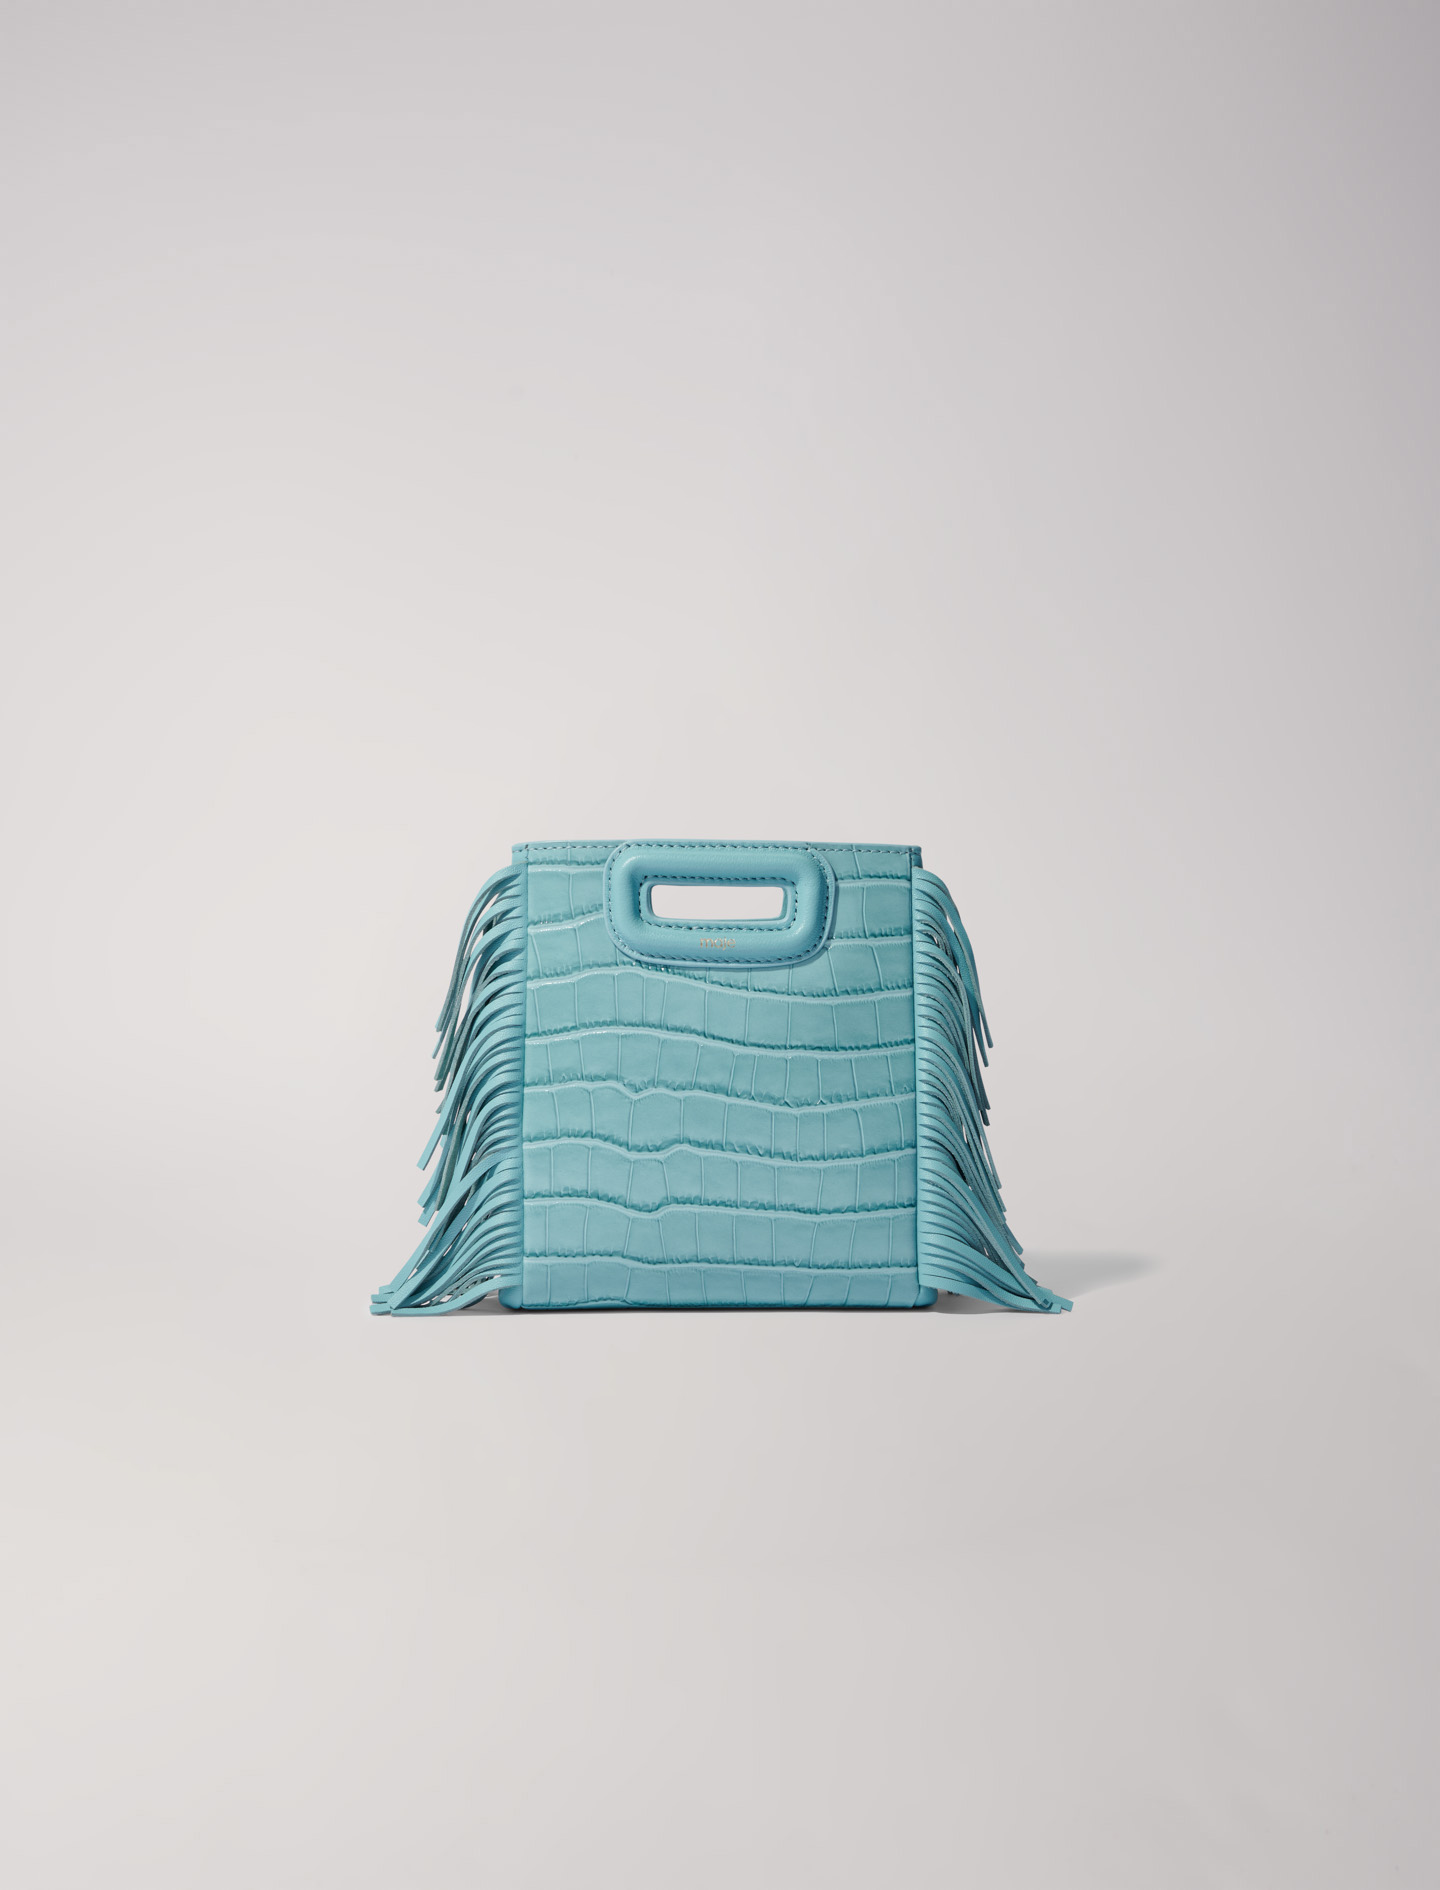 Mixte's polyester Chain: Mini embossed-leather M bag with chain, size Mixte-All Bags-OS (ONE SIZE), in color Turquoise Blue /